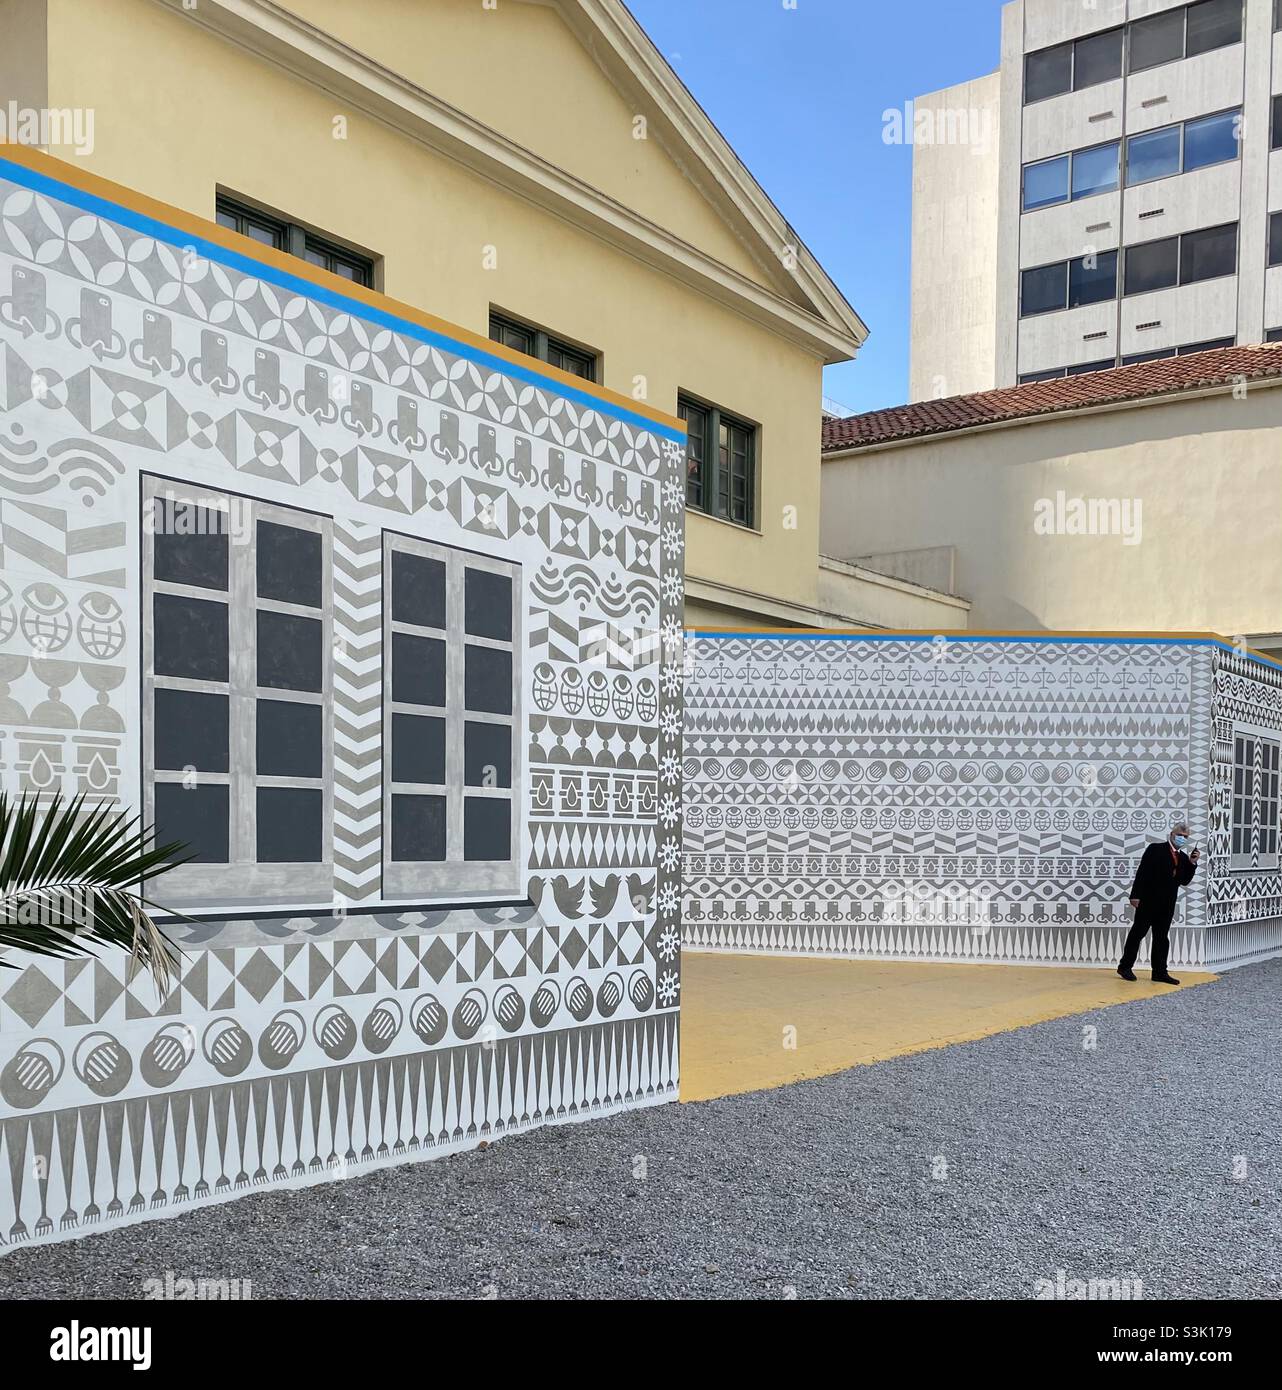 Mural by Navine Khan-Dossos on the former Santa Rosa Courthouse in Athens, Greece, as part of the 2021 Athens Biennale. The mural uses ‘xysta’, a style of black & white decoration from Chios Island. Stock Photo